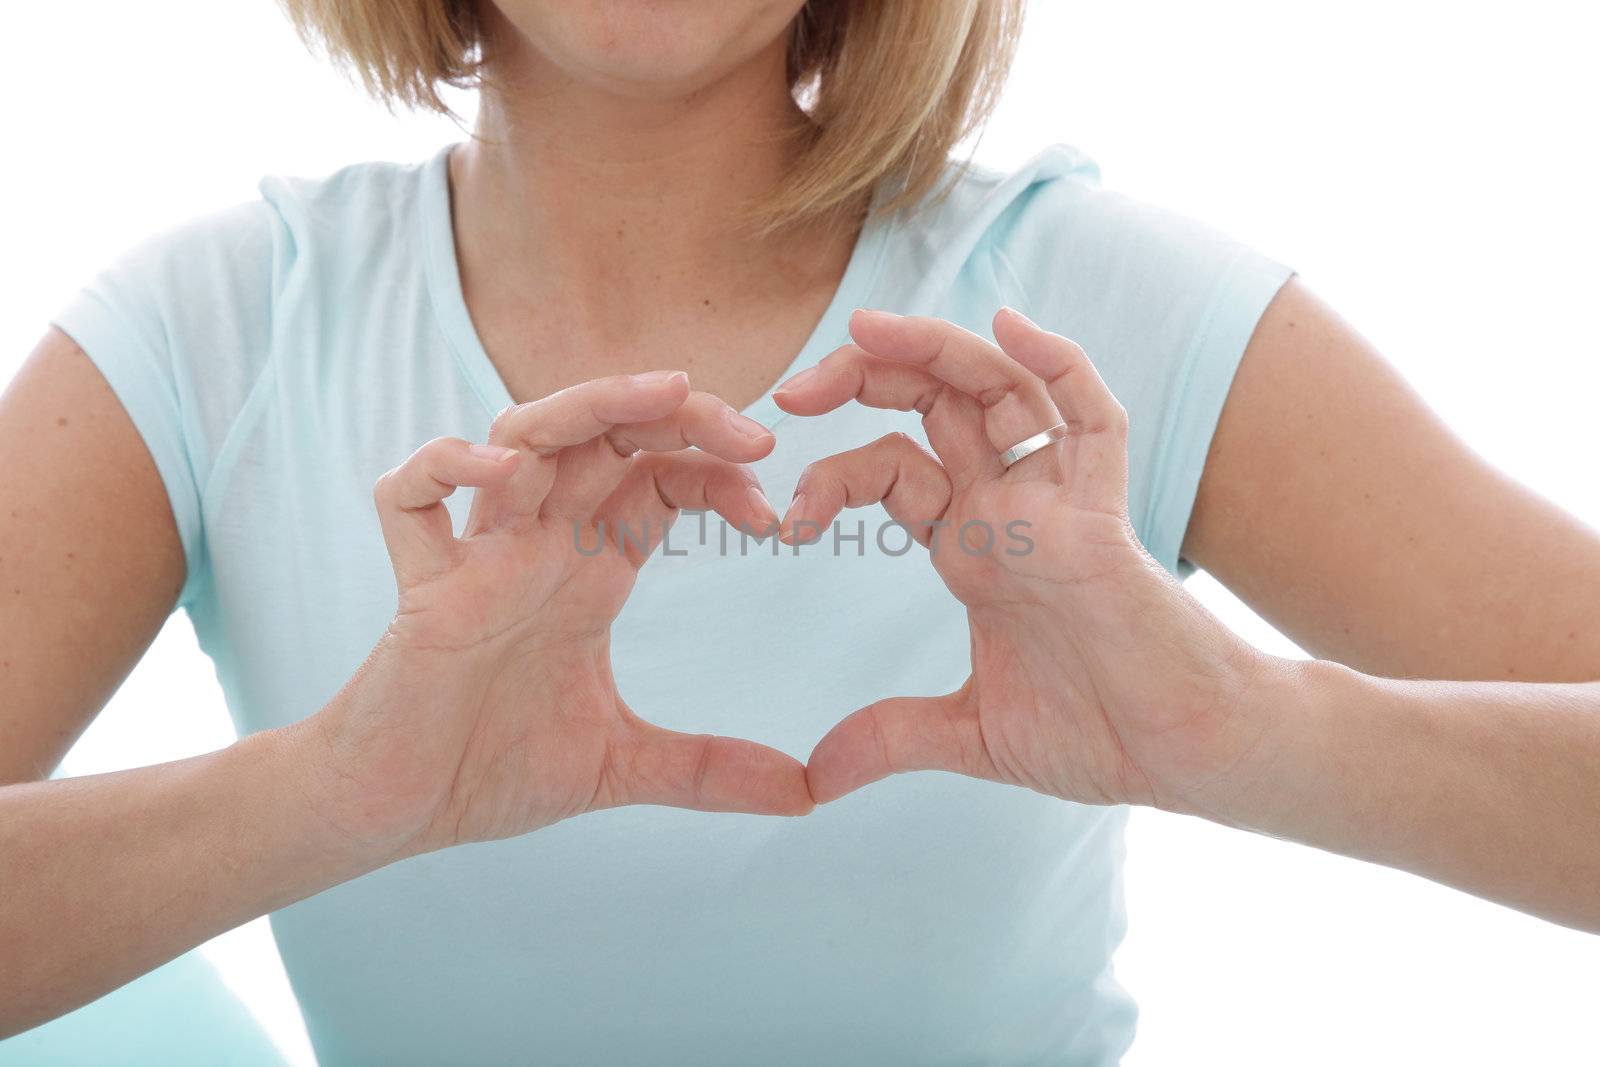 Woman making a heart gesture with her fingers in front of her chest, closeup cropped torso view of her hands